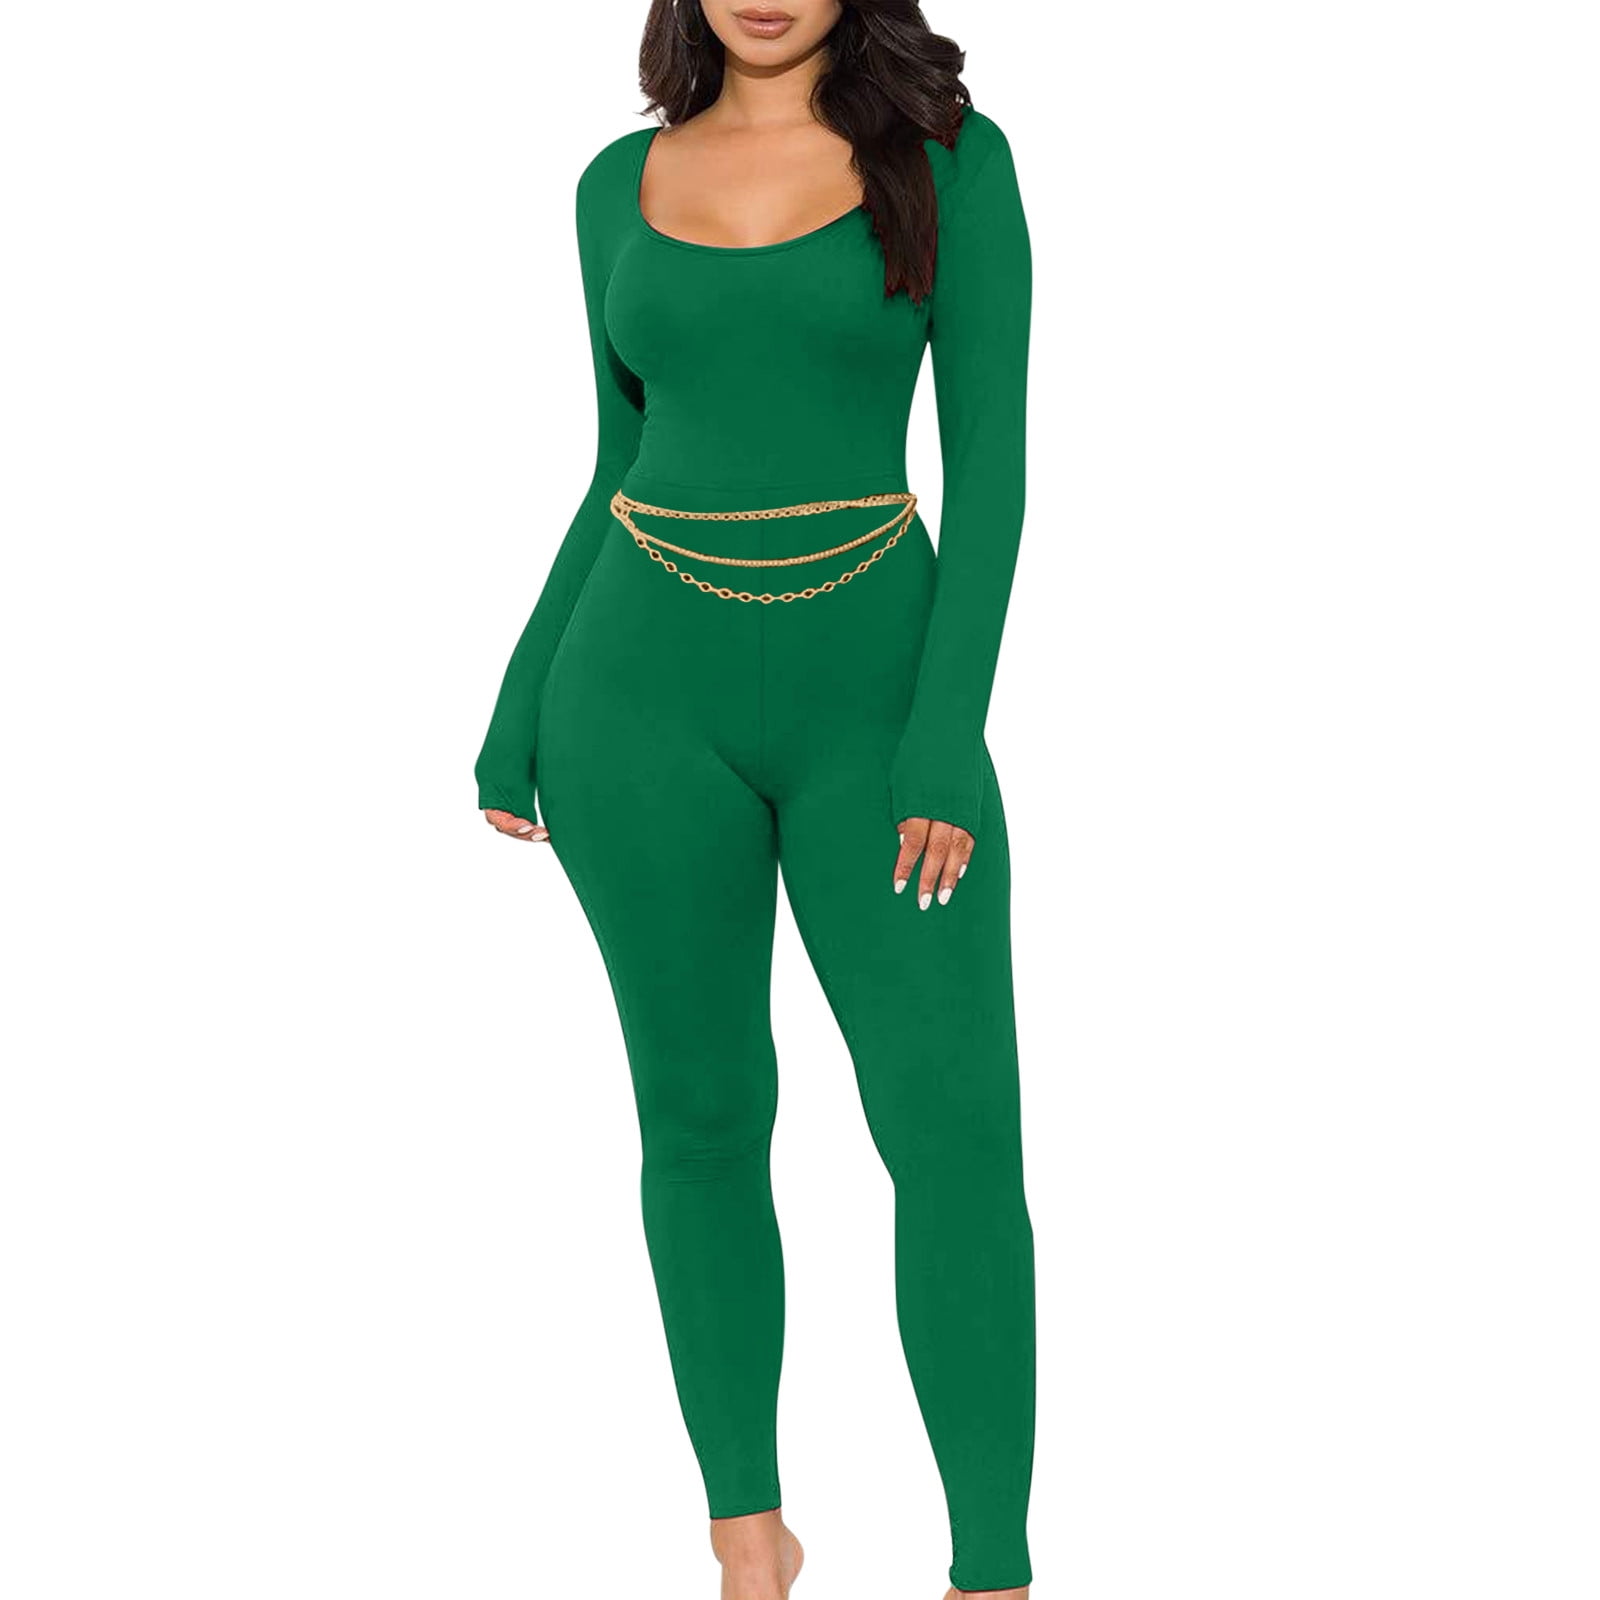 JIUKE Long Sleeve Jumpsuit for Women Solid Color Tight Yoga Sports